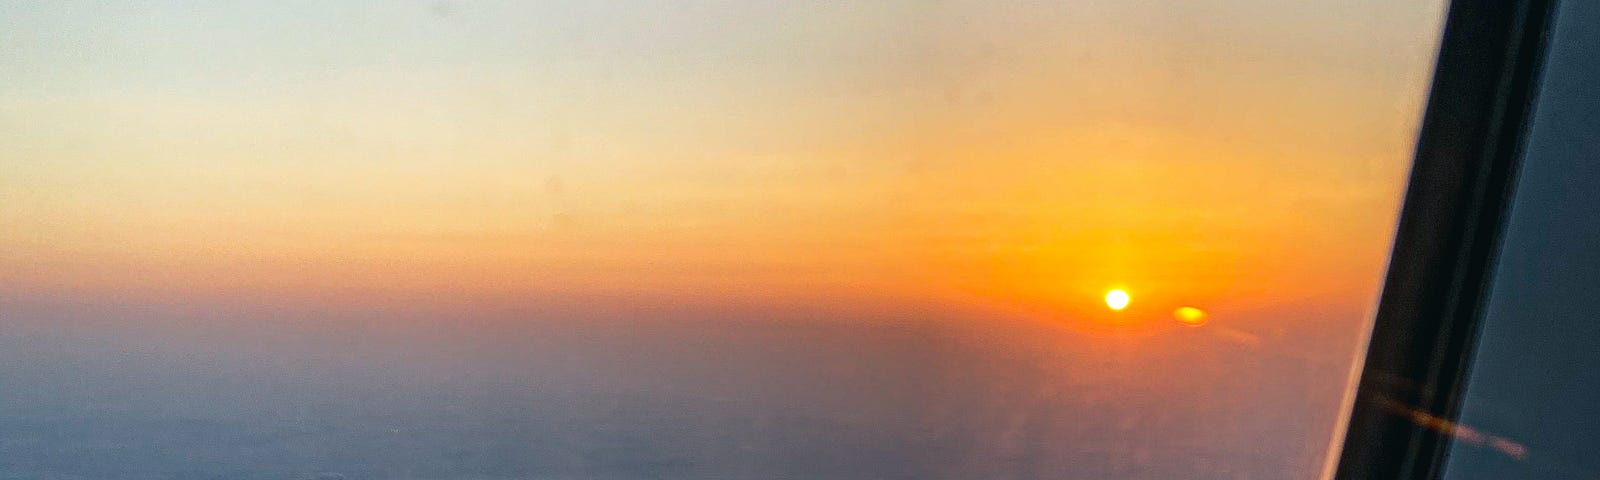 Sunset during my descent into Doha, Qatar. Photo by Author